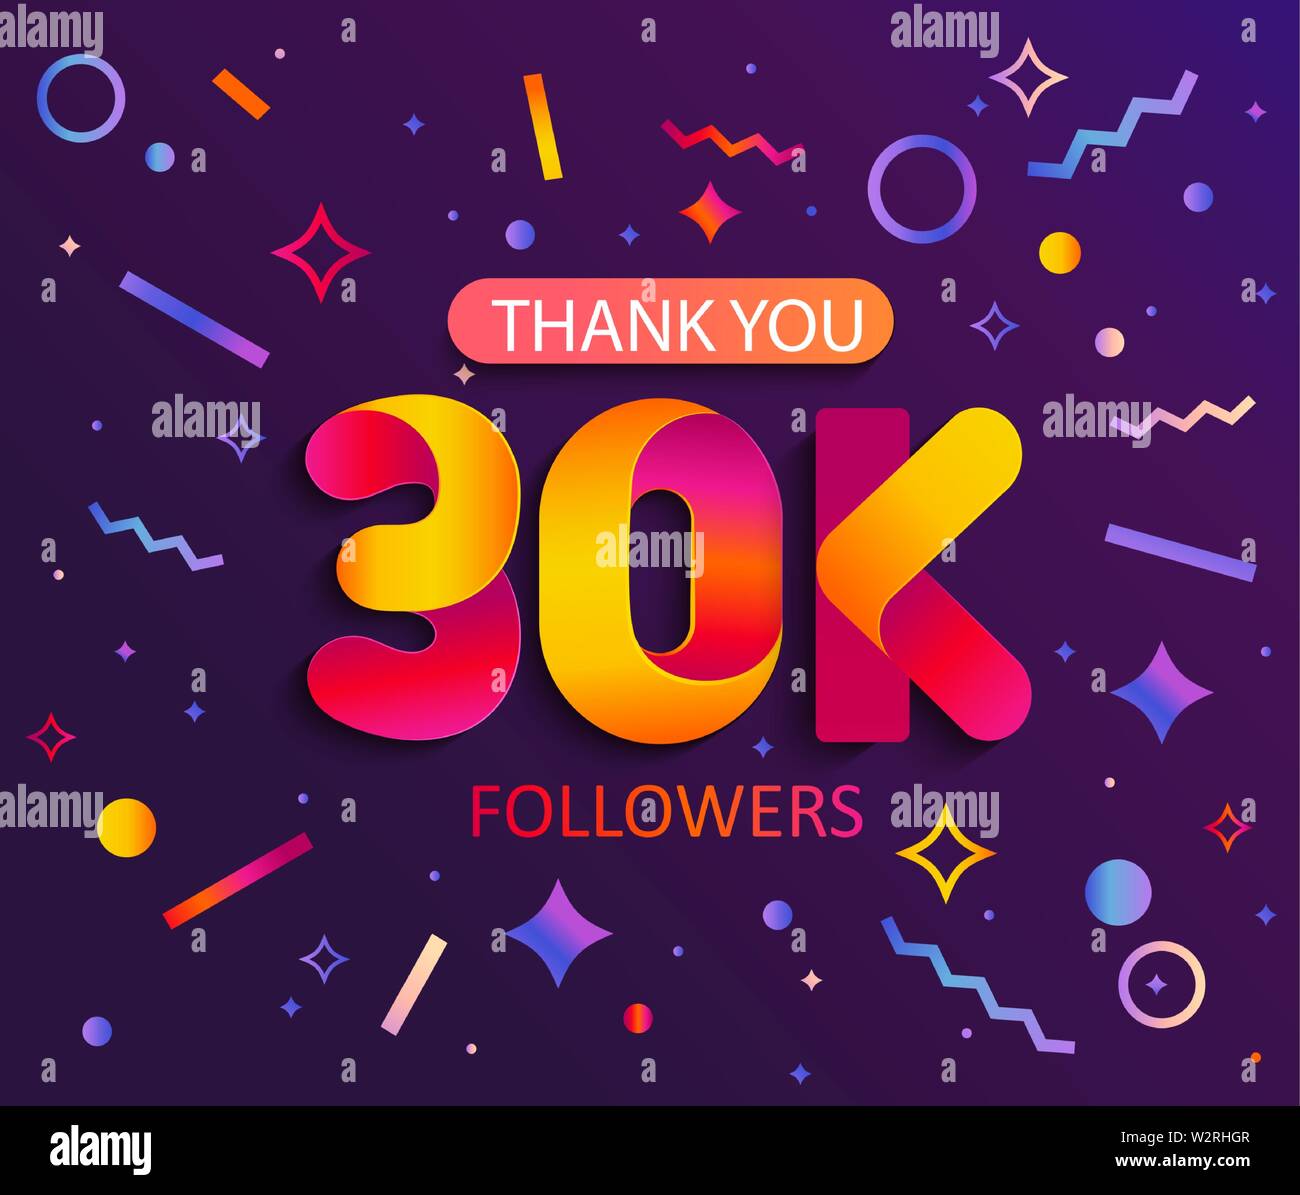 Thank you 30000 followers,thanks banner.30K follower congratulation card with geometric figures,lines,squares,circles for Social Networks.Web blogger, Stock Vector